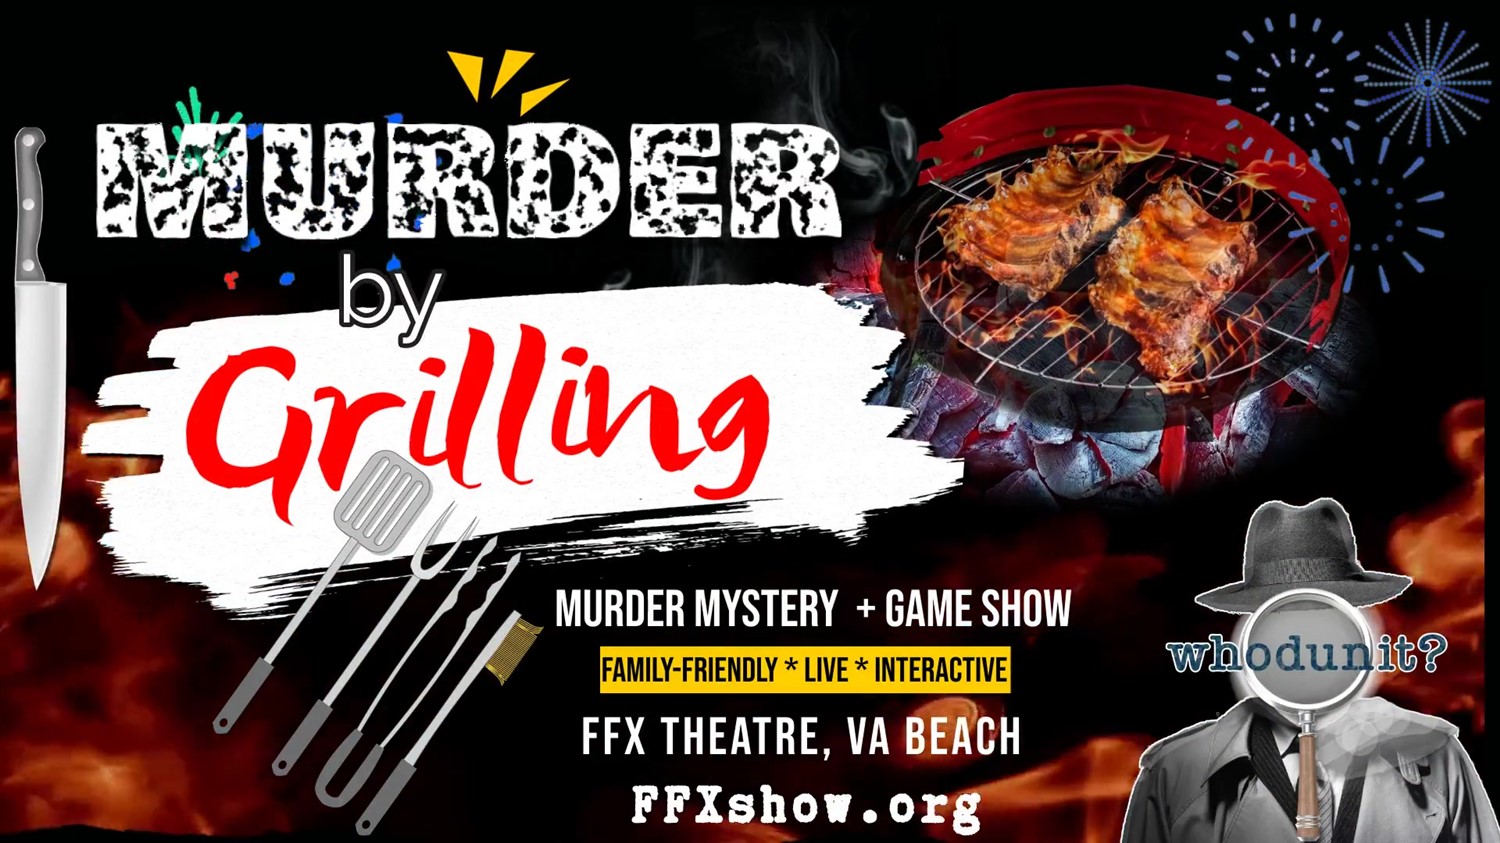 Whodunit? MURDER BY GRILLING Memorial Day Weekend Murder Mystery + Game Show on May 25, 19:00@FFX Theatre - Pick a seat, Buy tickets and Get information on Family Fun Xperience tickets.ffxshow.org